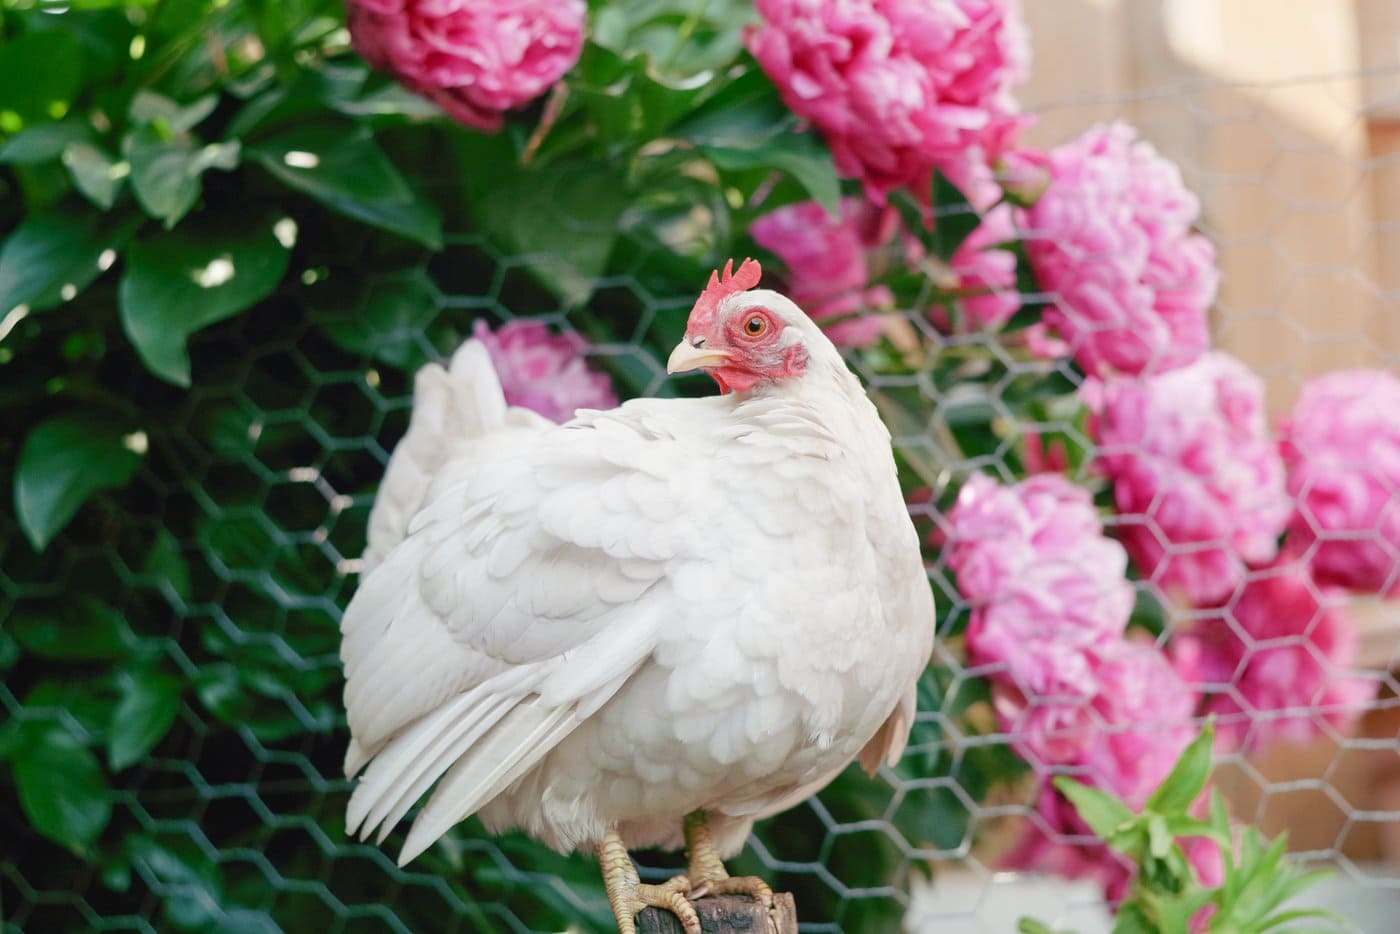 Pretty white chicken in the backyard with pink flowers